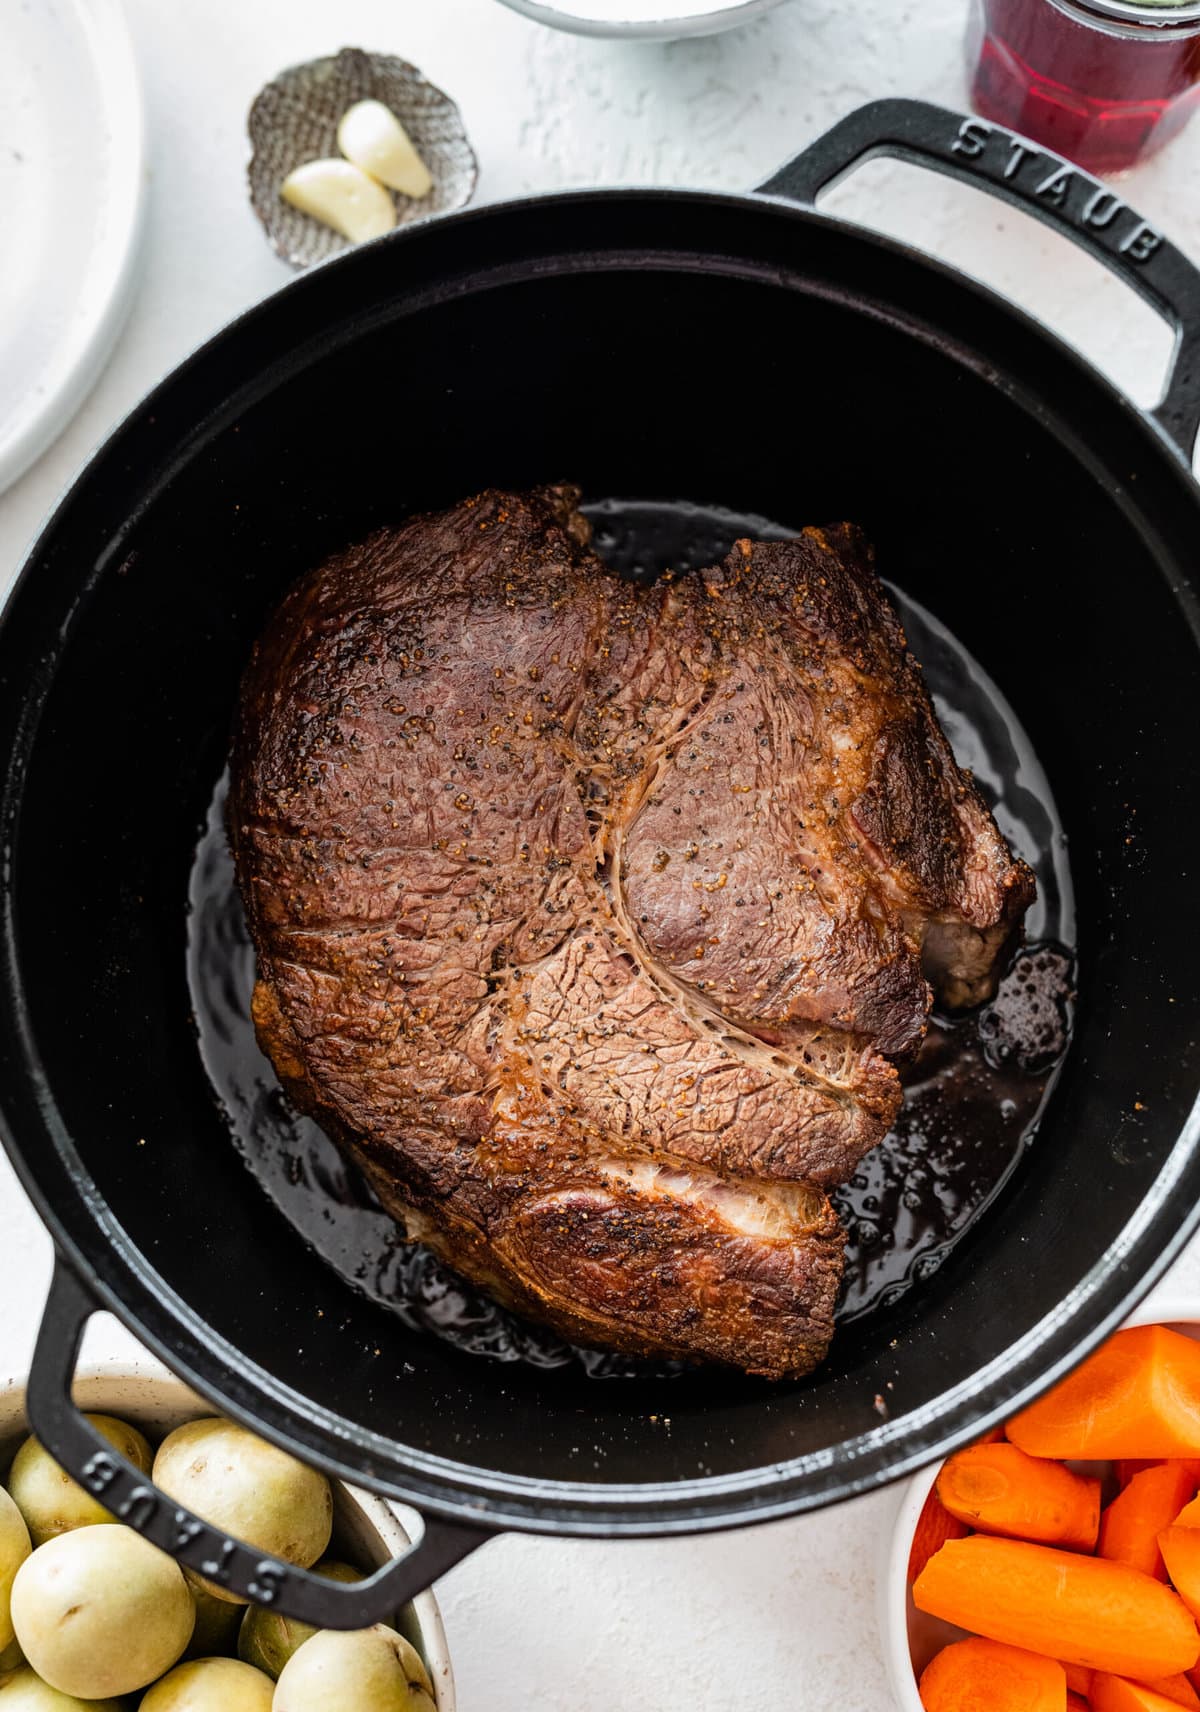 How to make the best perfect pot roast: brown the meat on both sides in a pot.